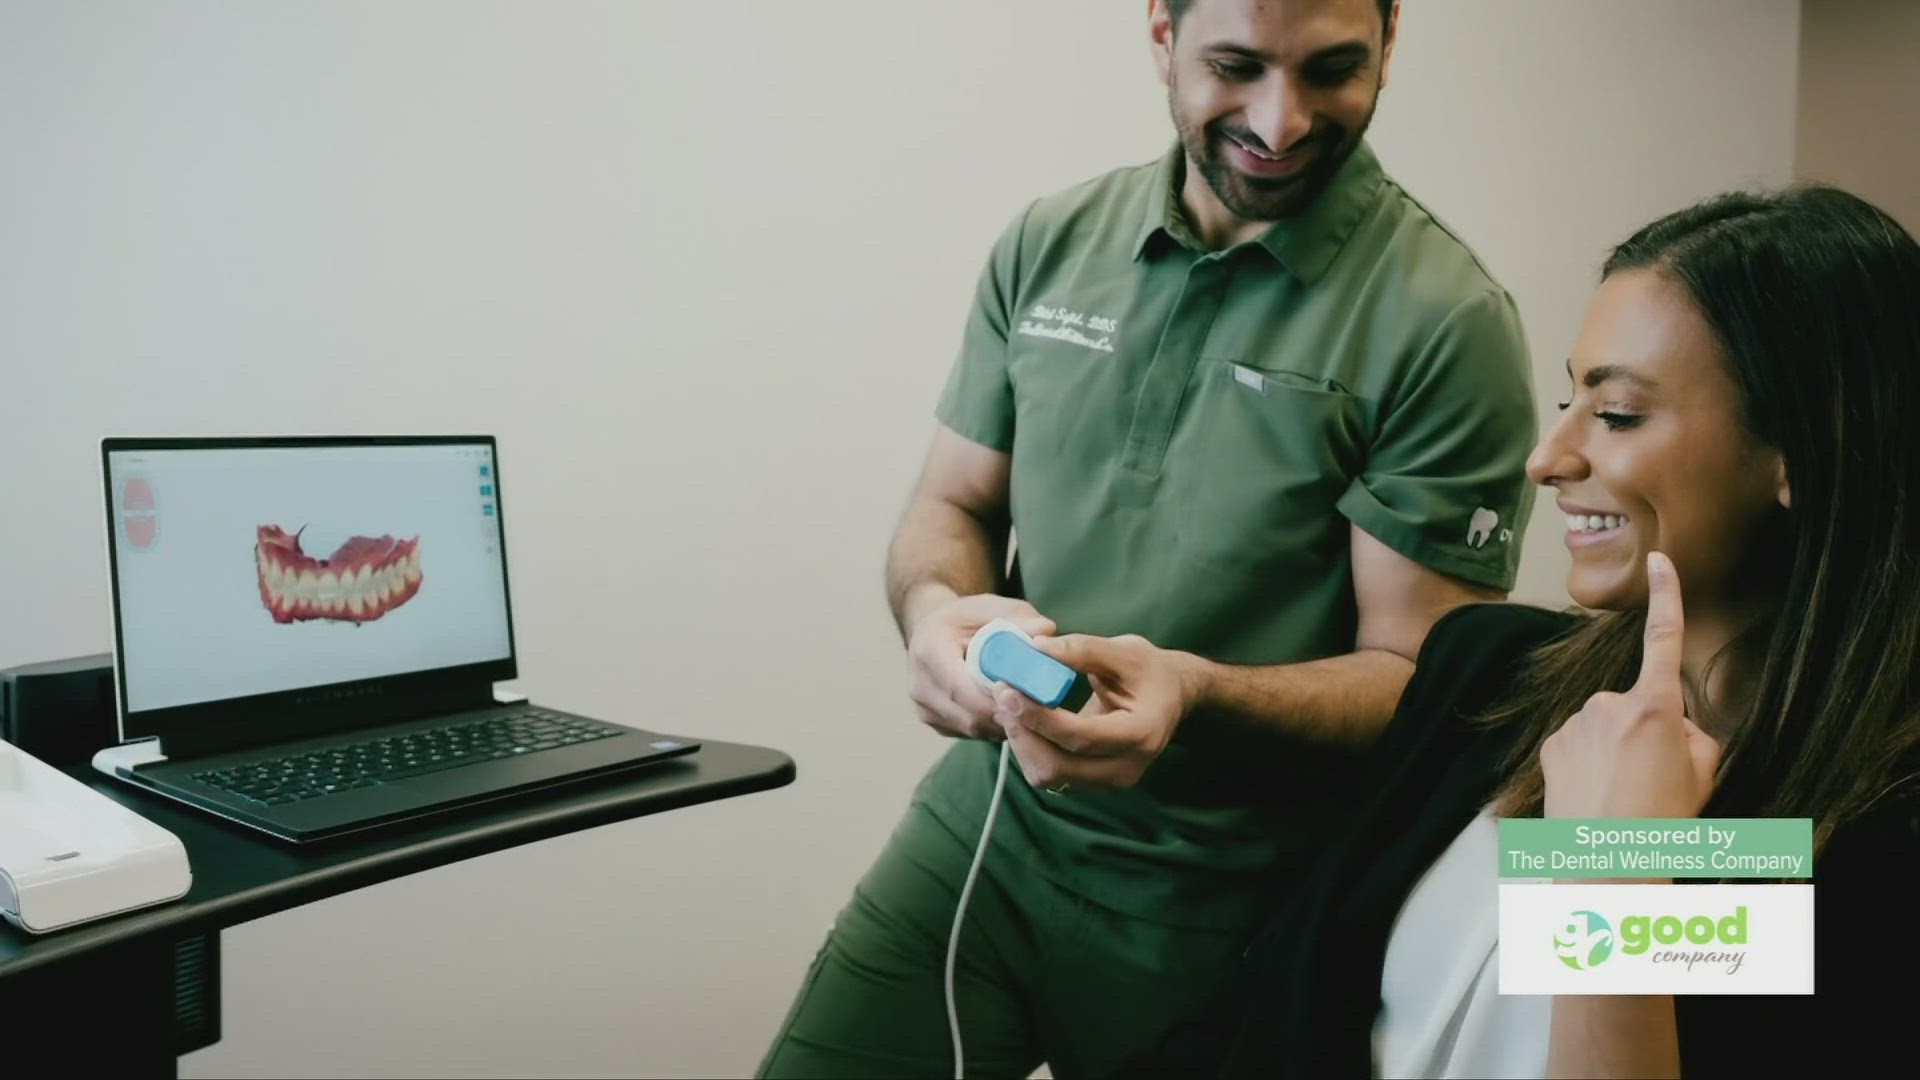 Joe speaks with Dr. Bilal Sajid, Owner & Clinical Director of The Dental Wellness Company, about the services they offer.  Sponsored by The Dental Wellness Company.